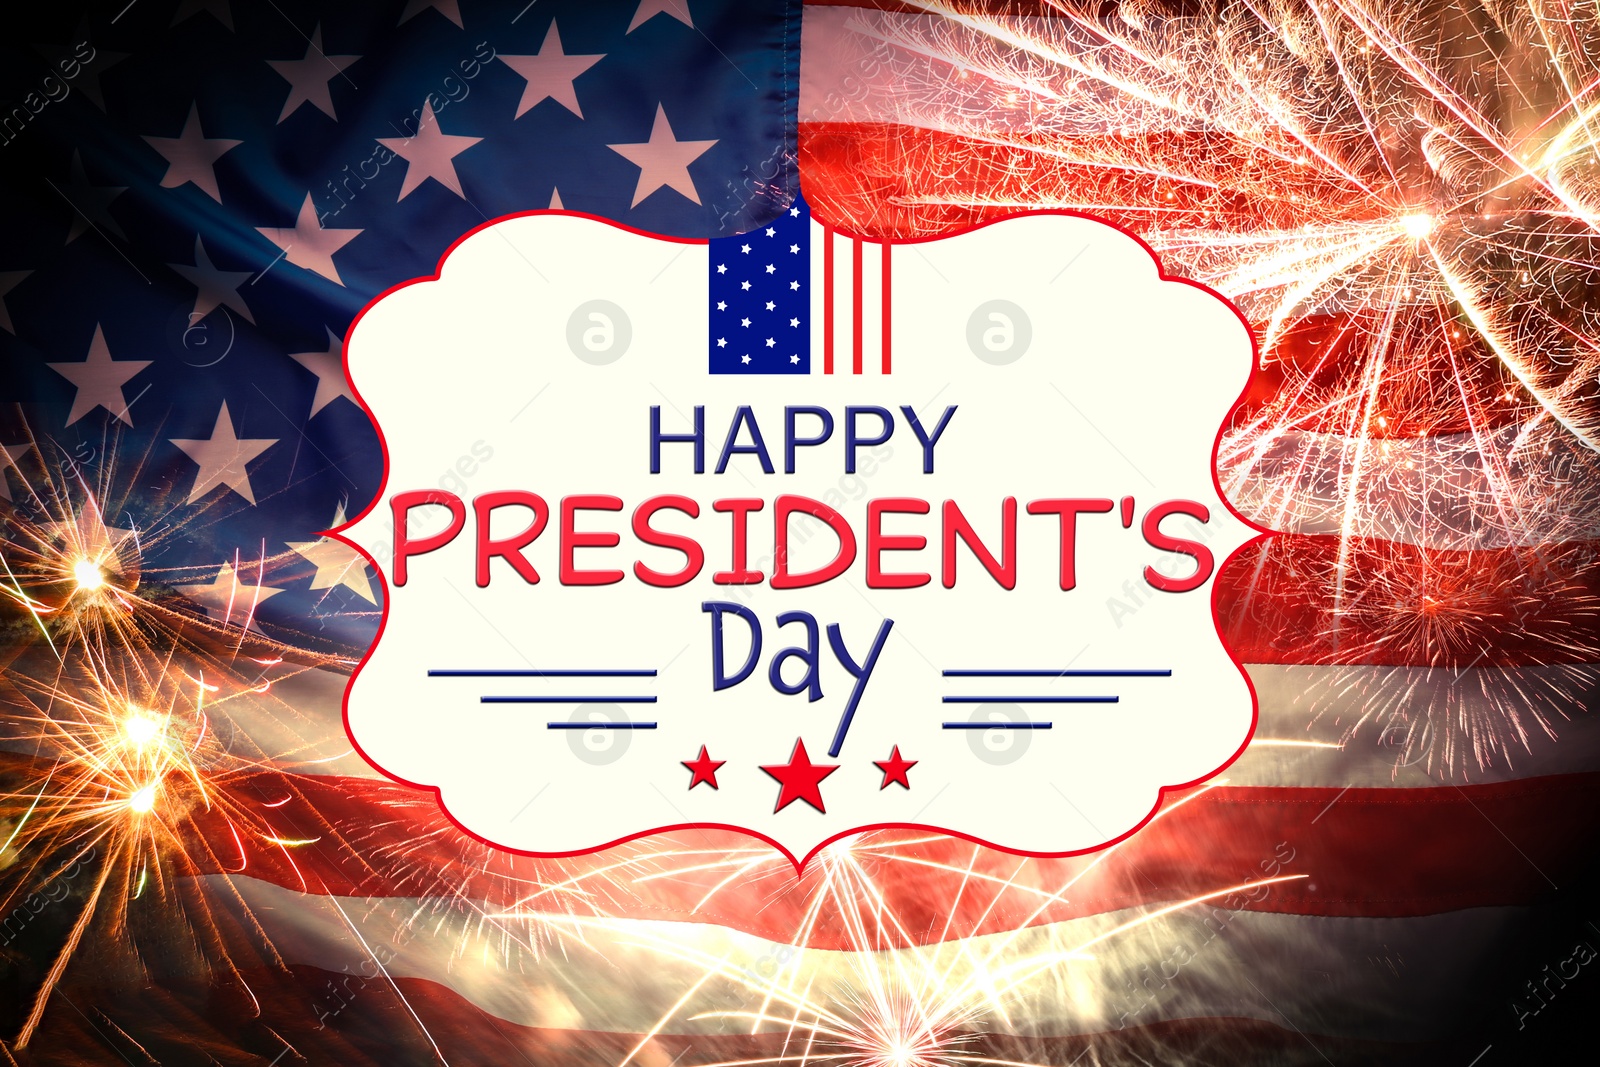 Image of Happy President's Day - federal holiday. National American flag and fireworks